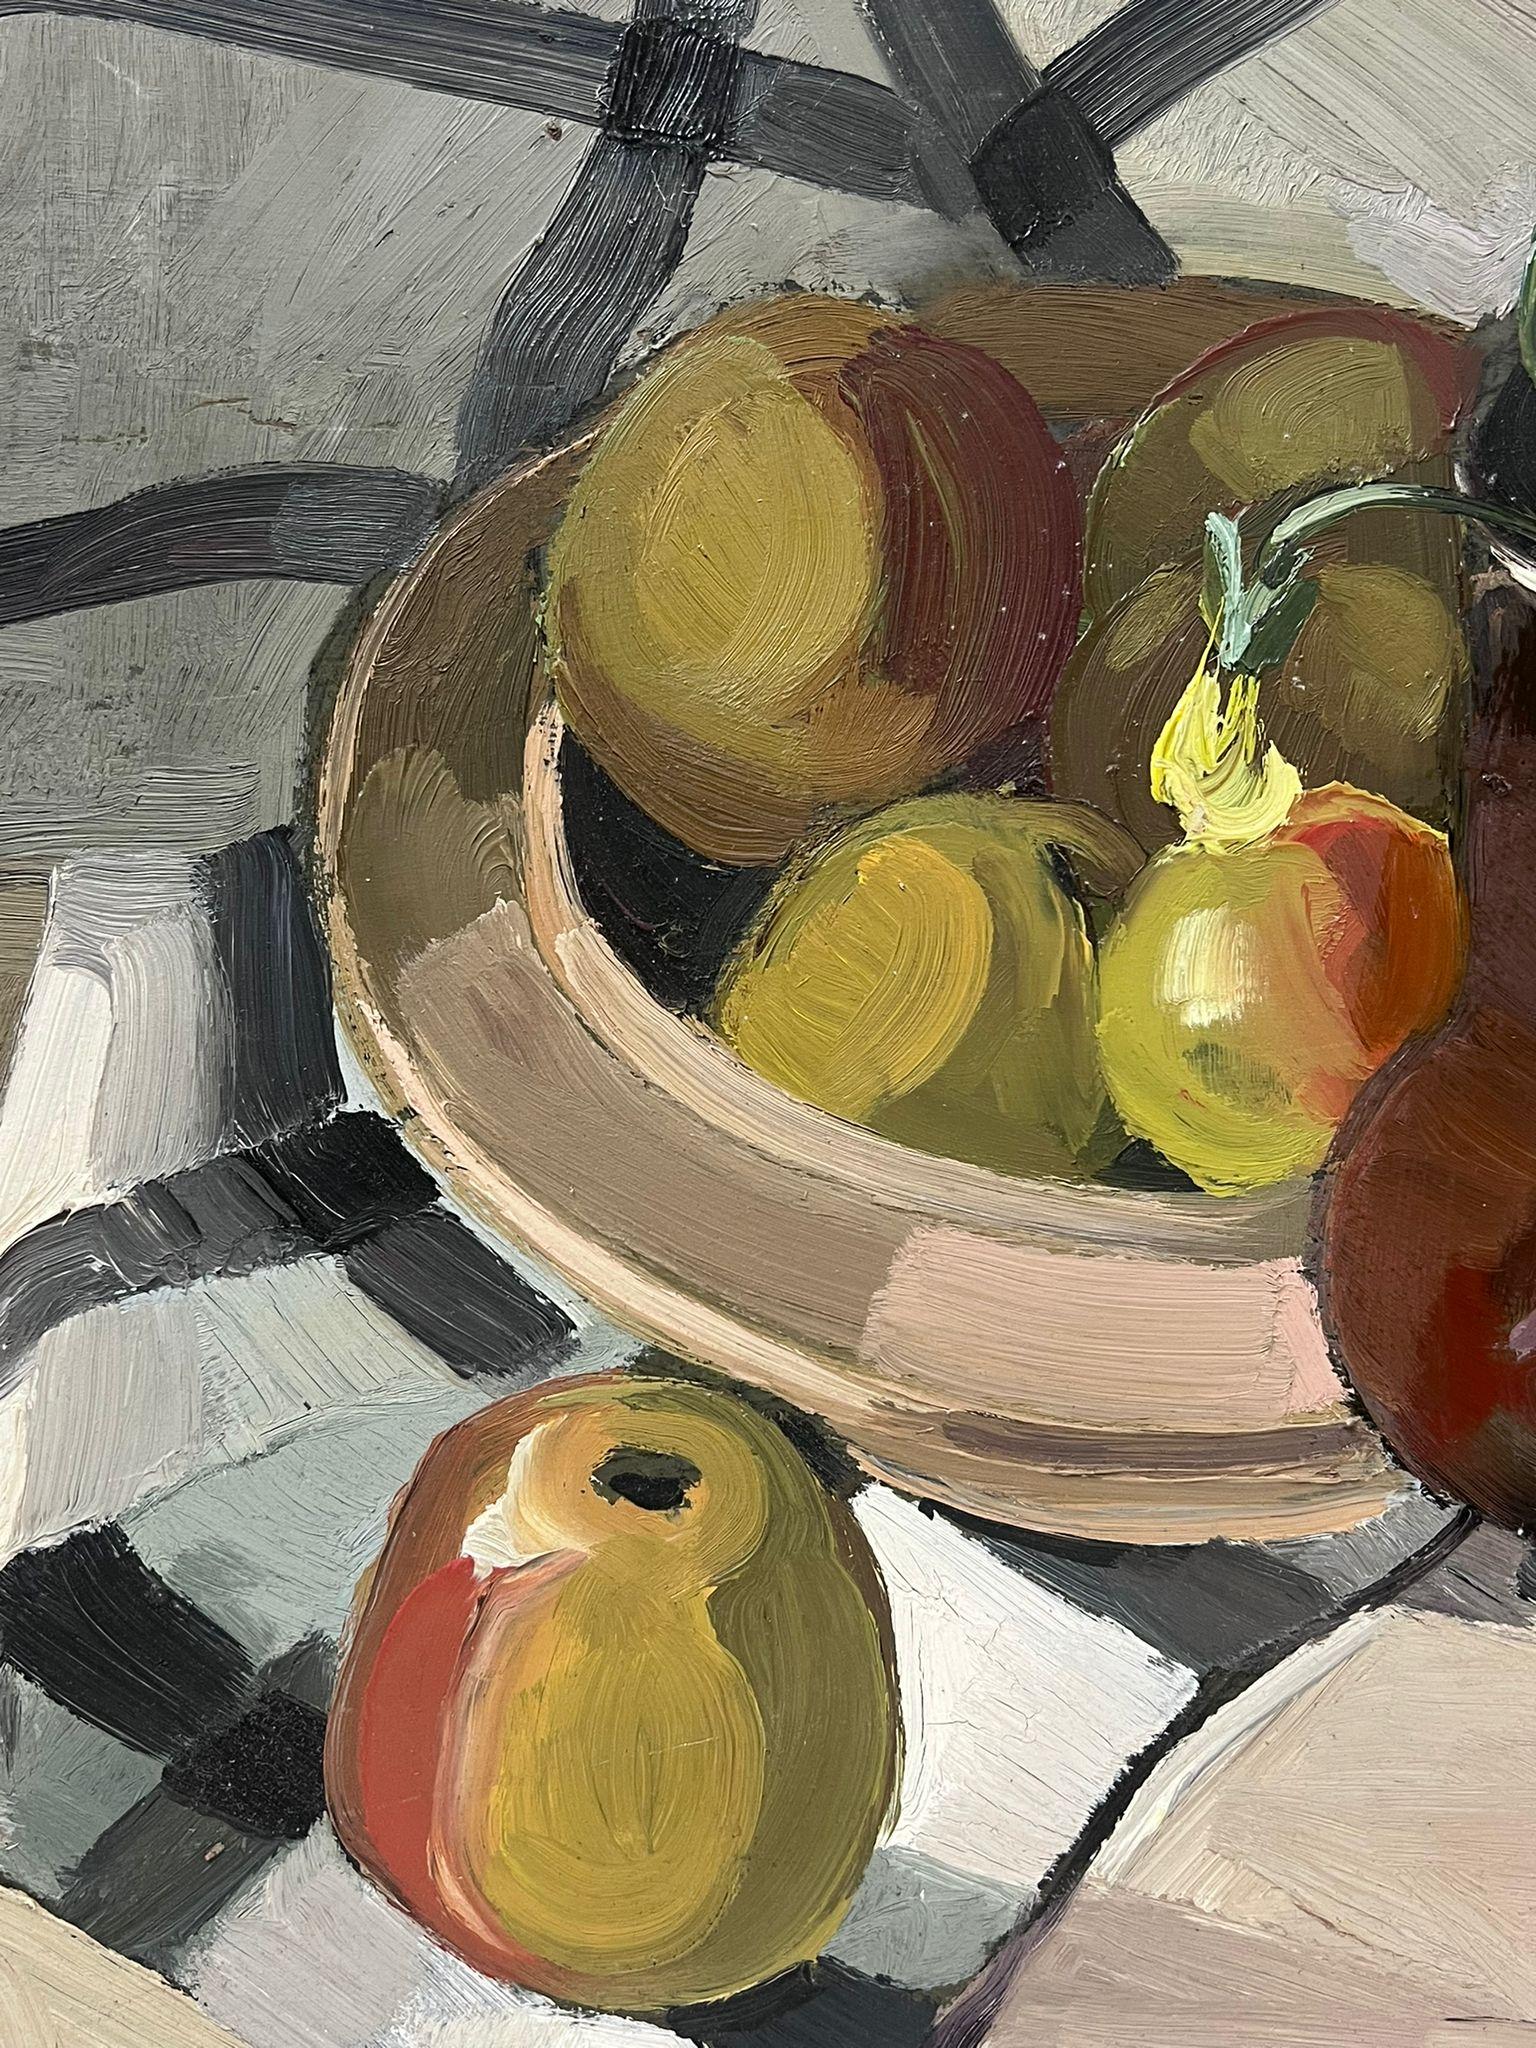 1930's French Impressionist Table Kitchen Table Interior Apples and Brown Jug  - Painting by Y. Blanchon